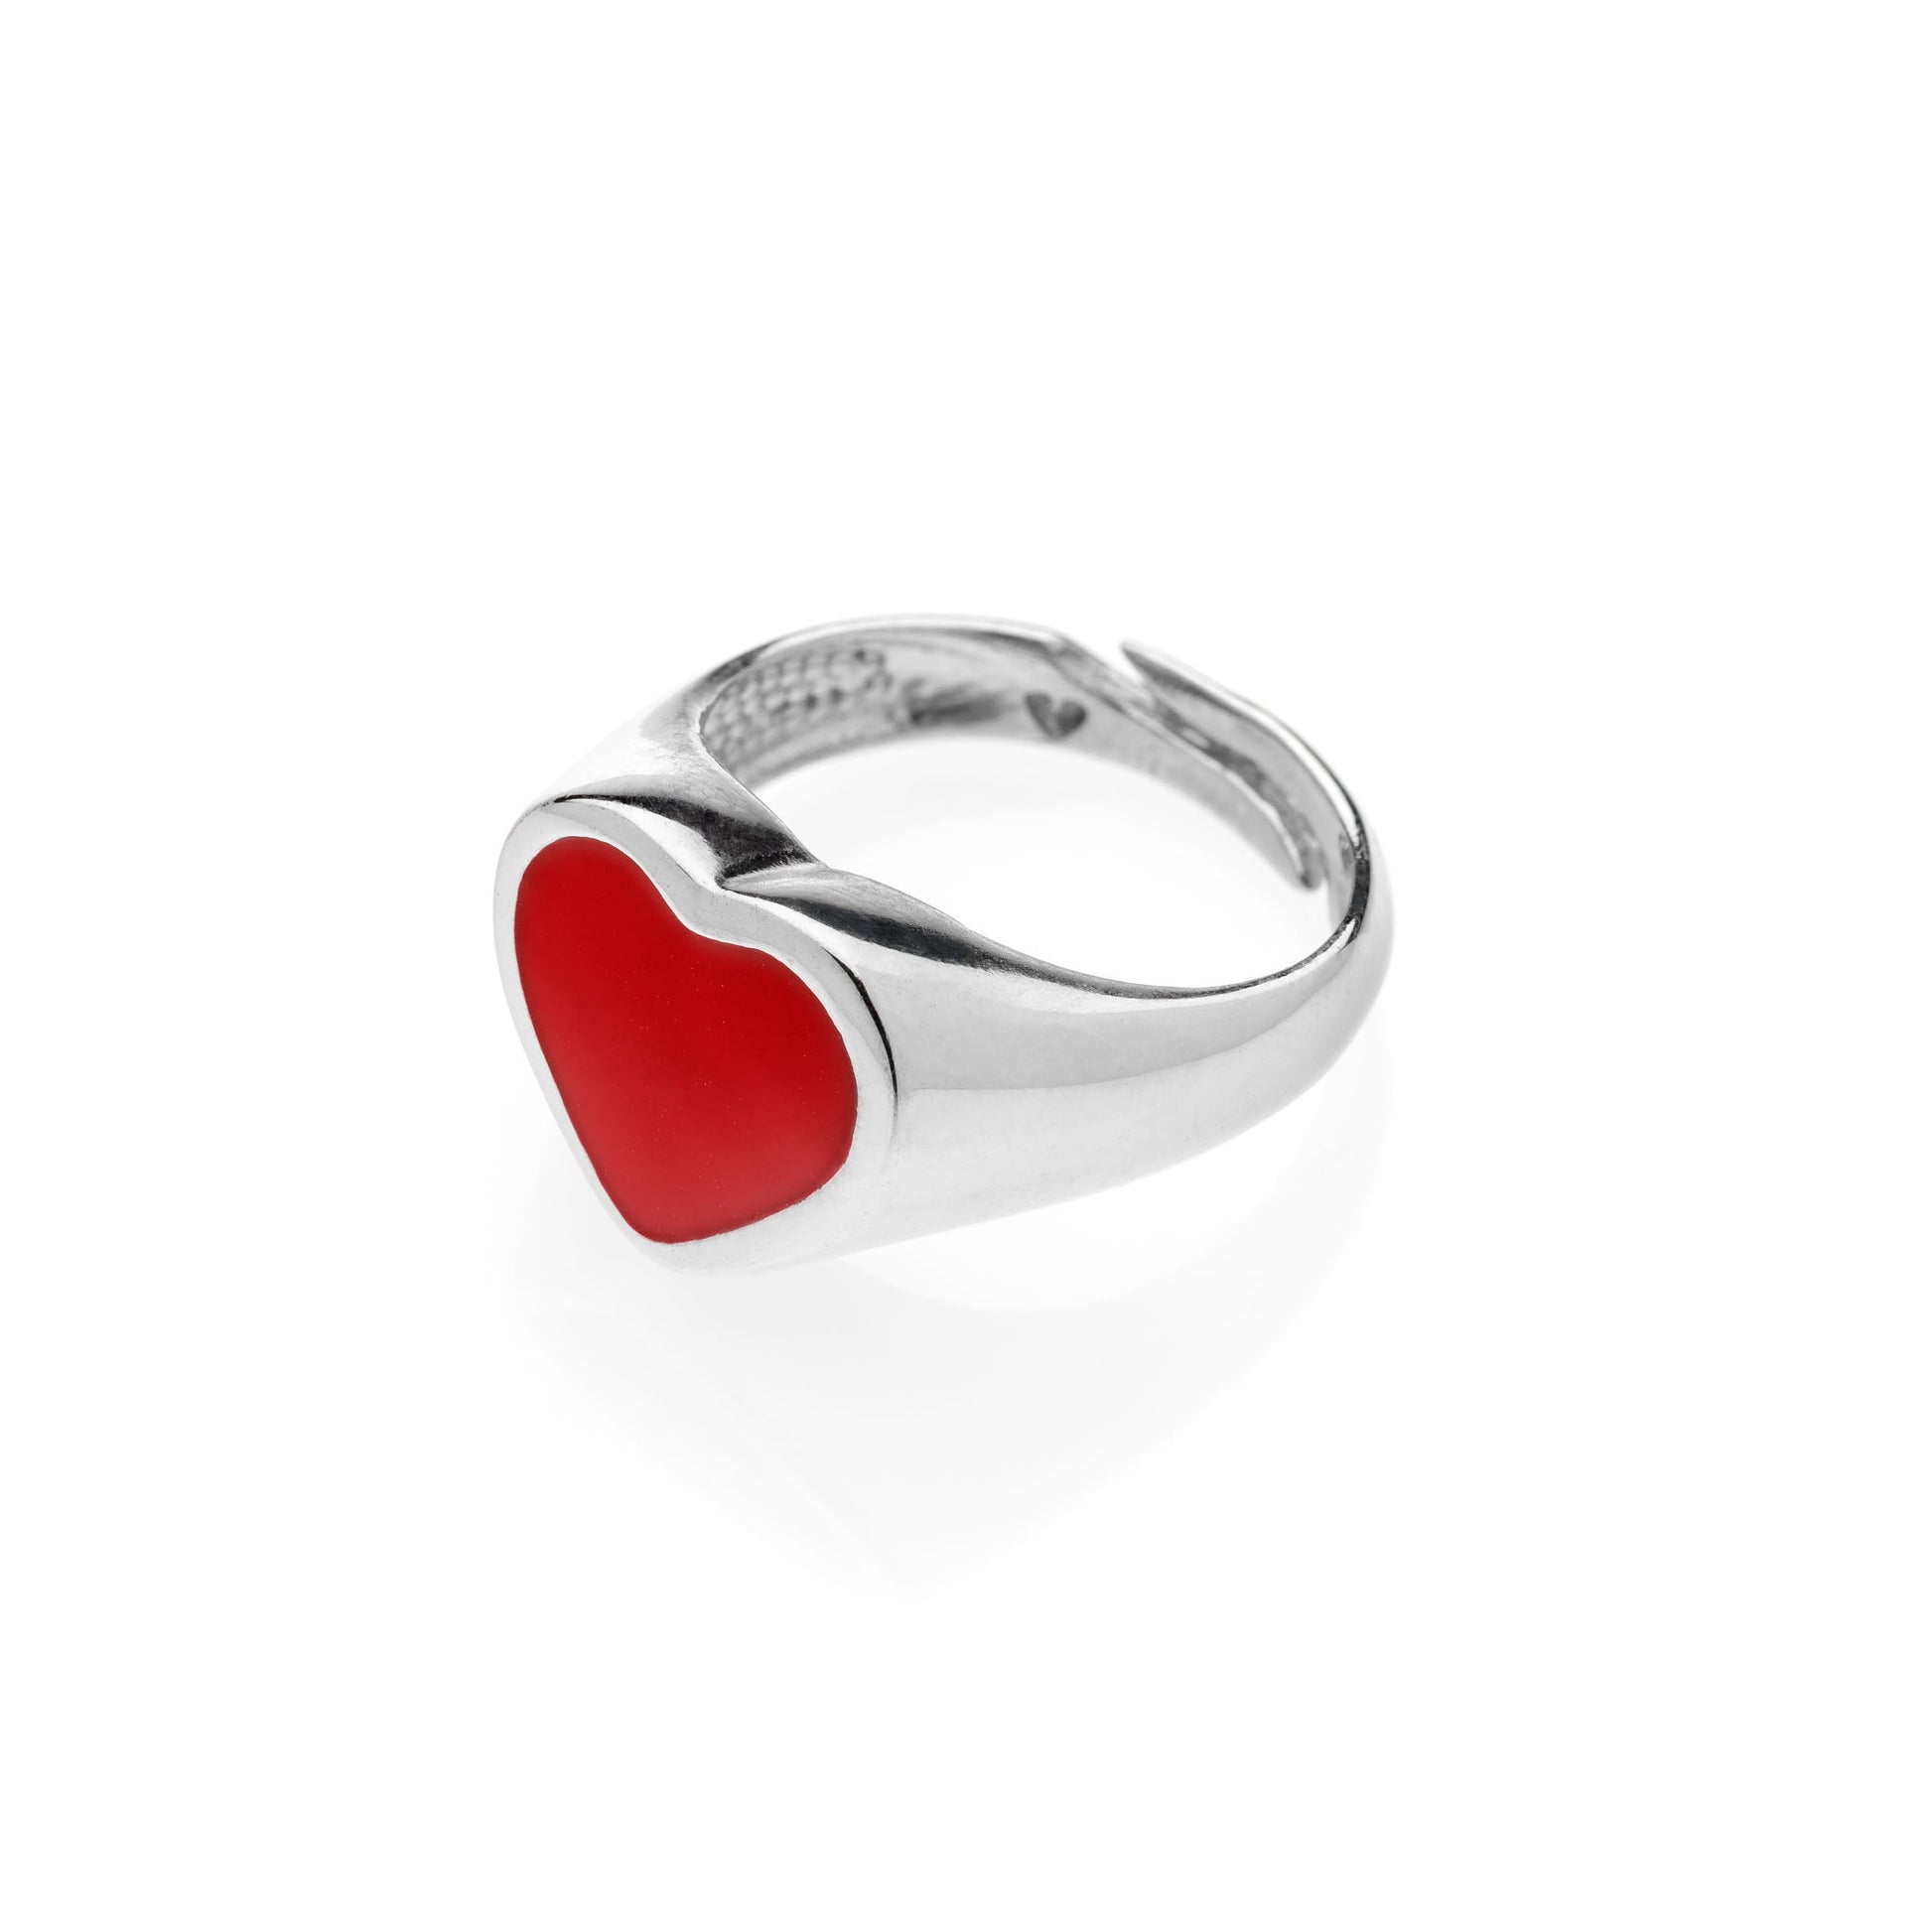 PAUL Heart chevalier ring 925 sterling silver #MS098AN - MARIA SALVADOR